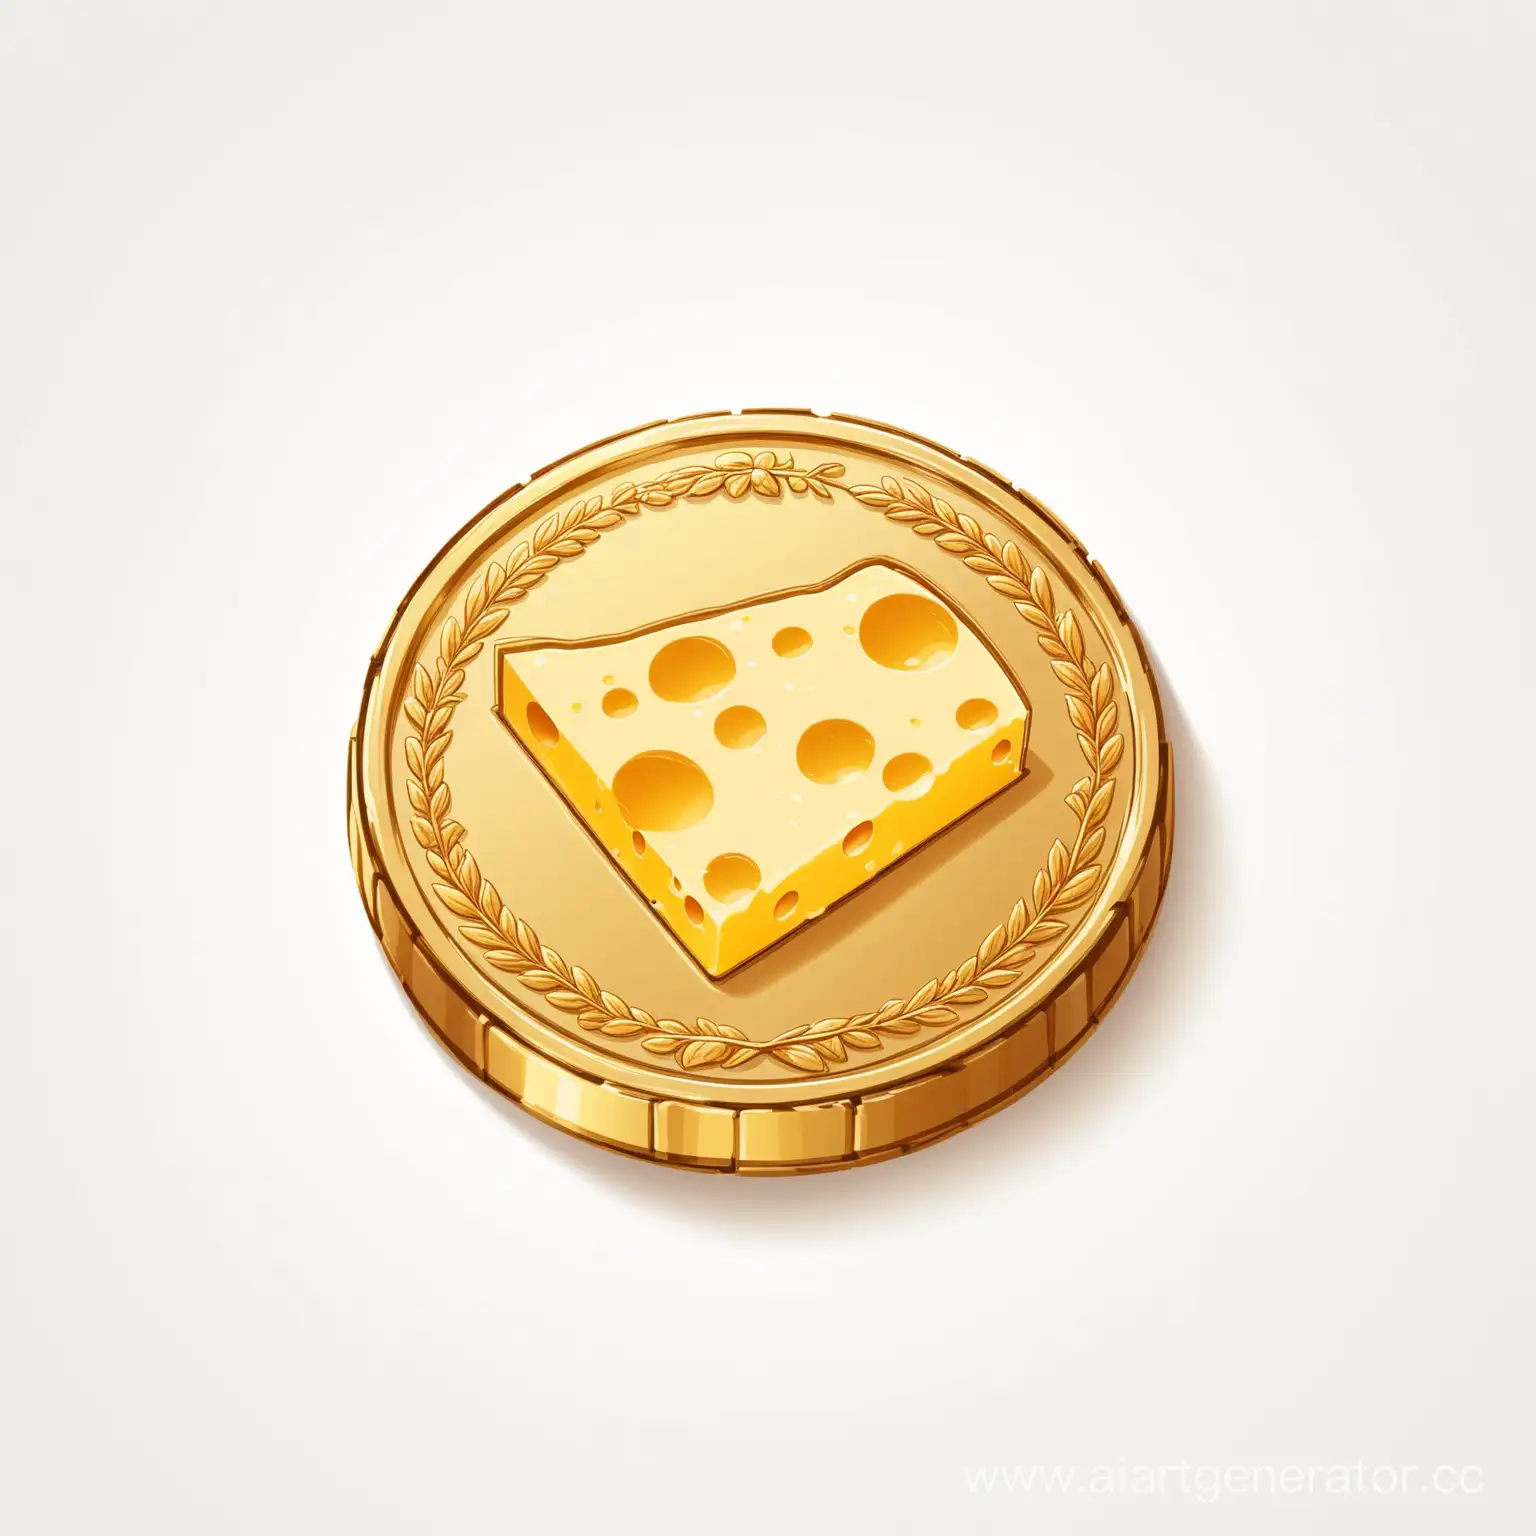 Golden-Cheese-Coin-on-White-Background